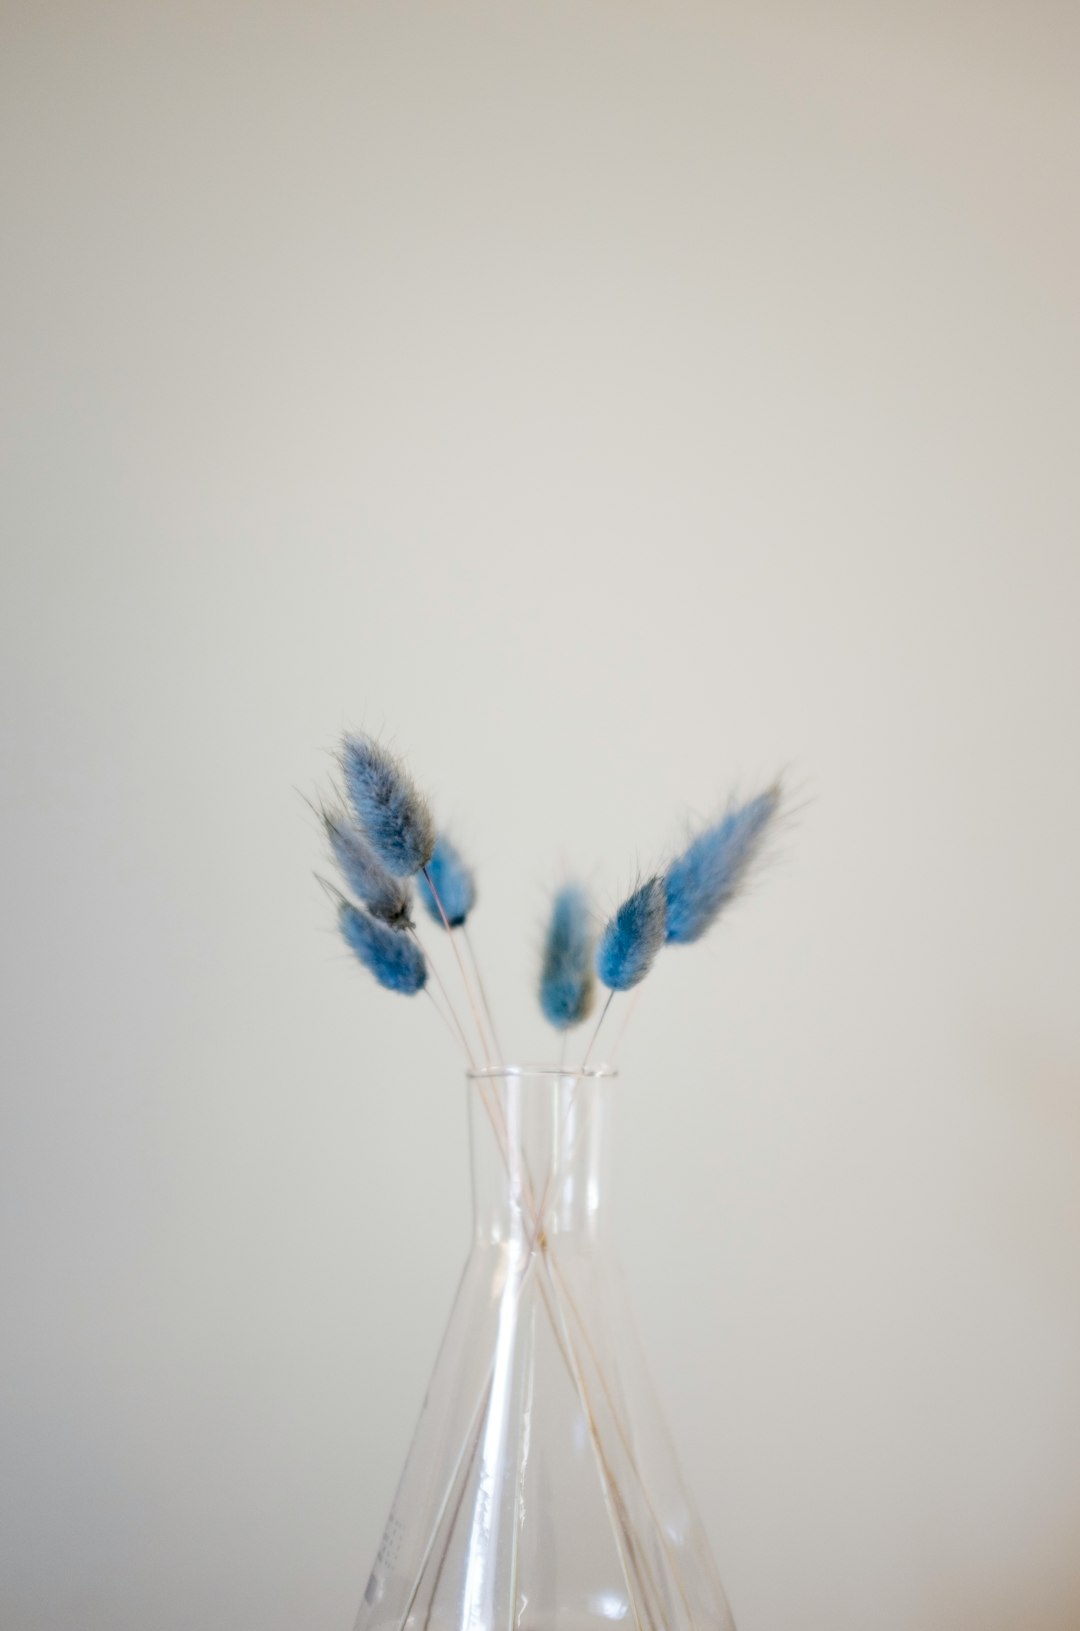 blue and white feather in clear glass vase